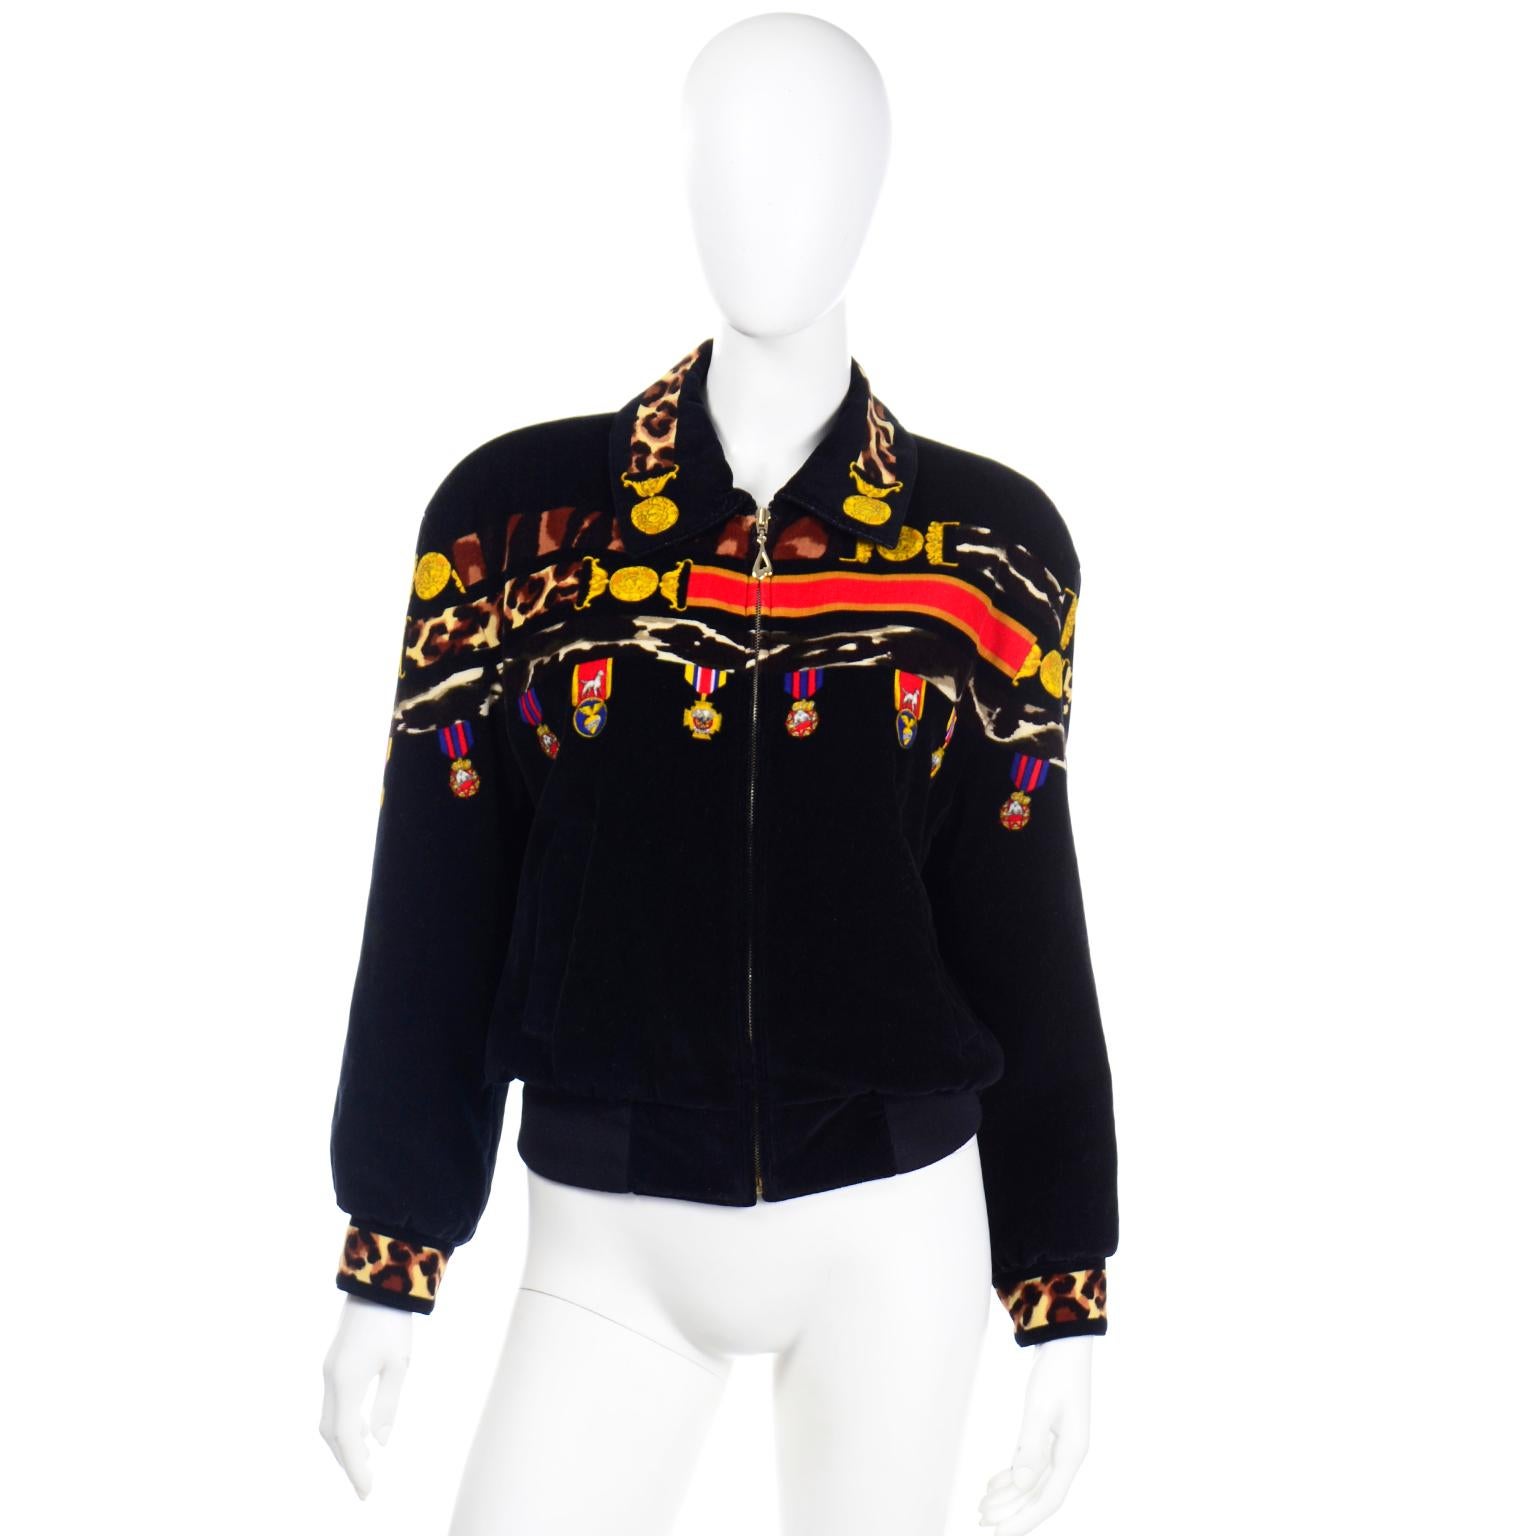 This is a really fun vintage 1980's Escada by Margaretha Ley black velvet zip front jacket with a colorful novelty medals print. The jacket has leopard print on the cuffs cuffs and in the upper bodice design. Some of the medals feature images of